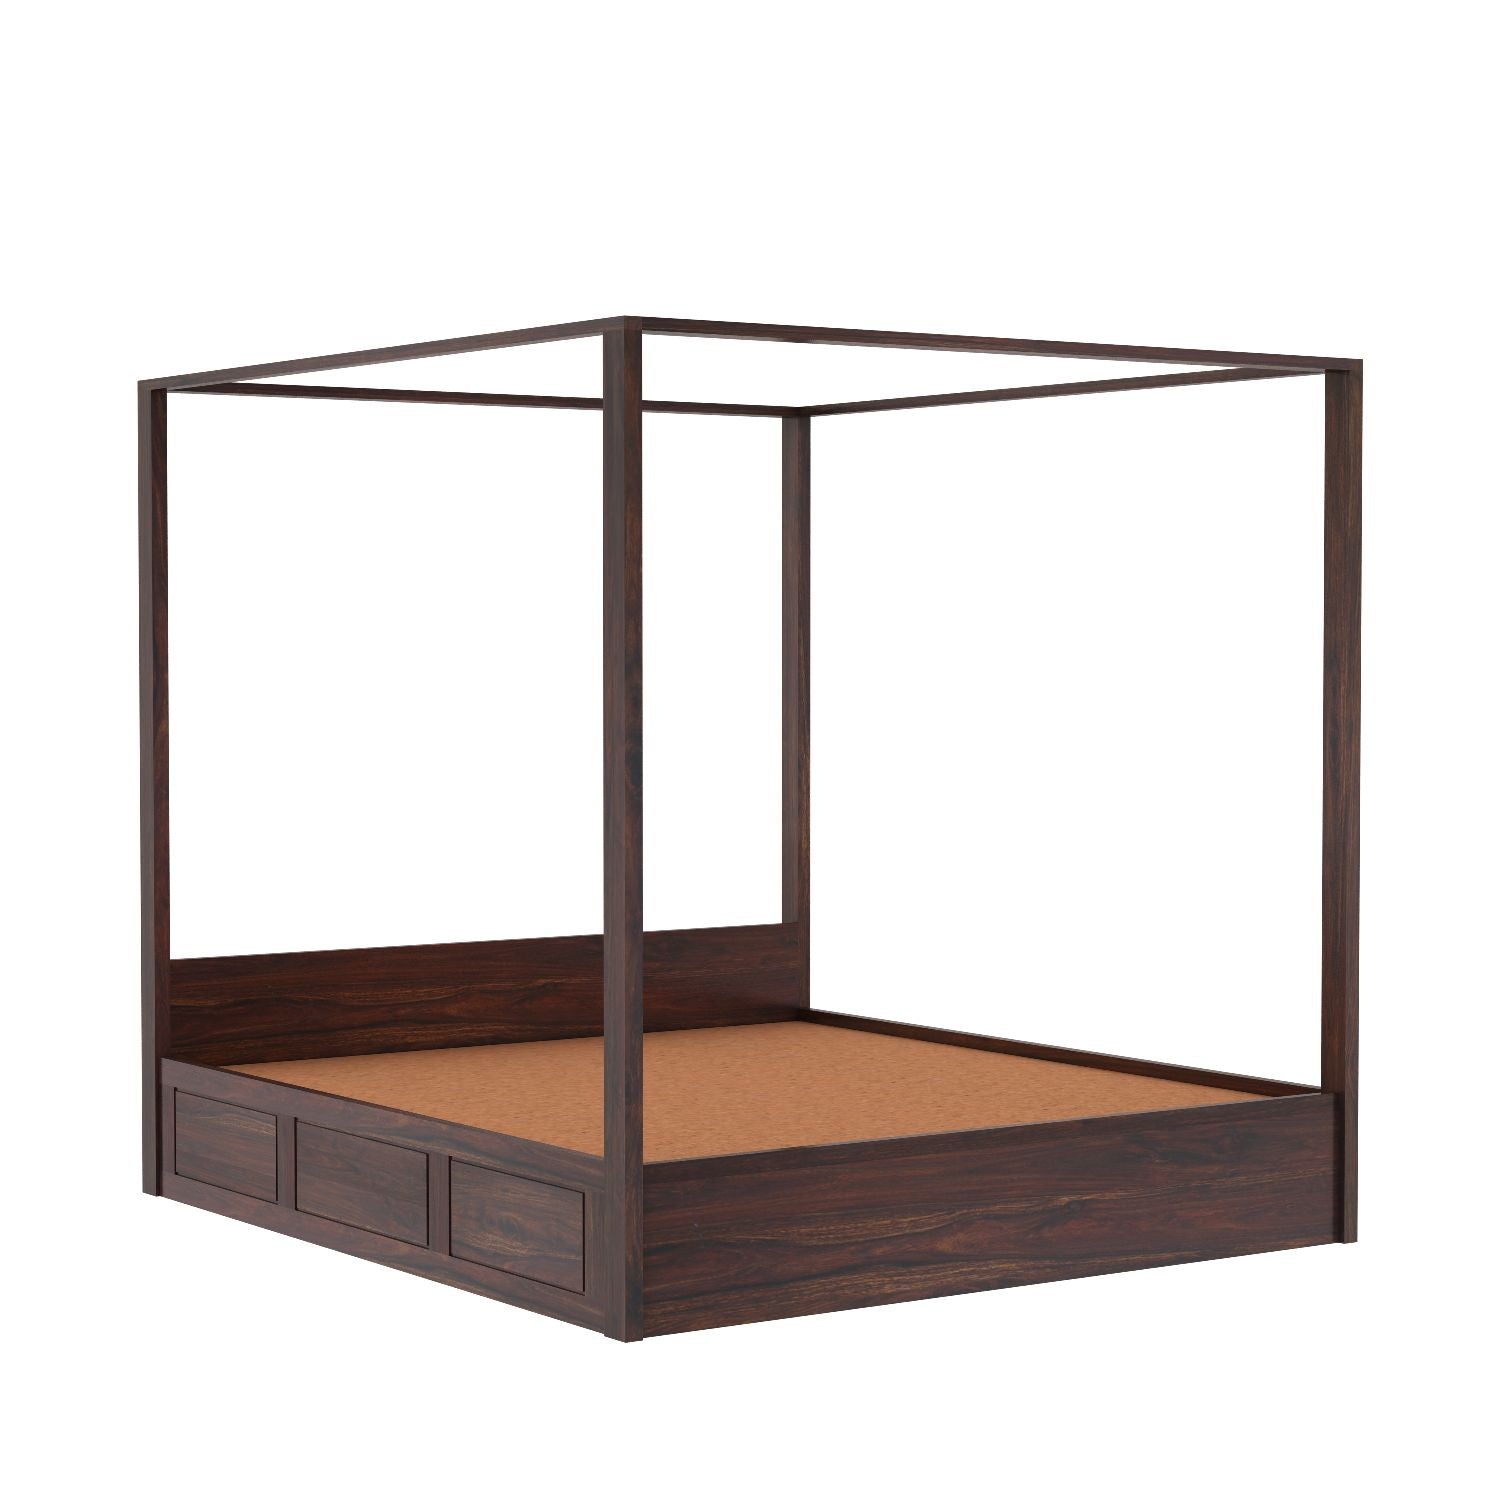 Solivo Solid Sheesham Wood Hydraulic Poster Bed With Box Storage (Queen Size, Walnut Finish)